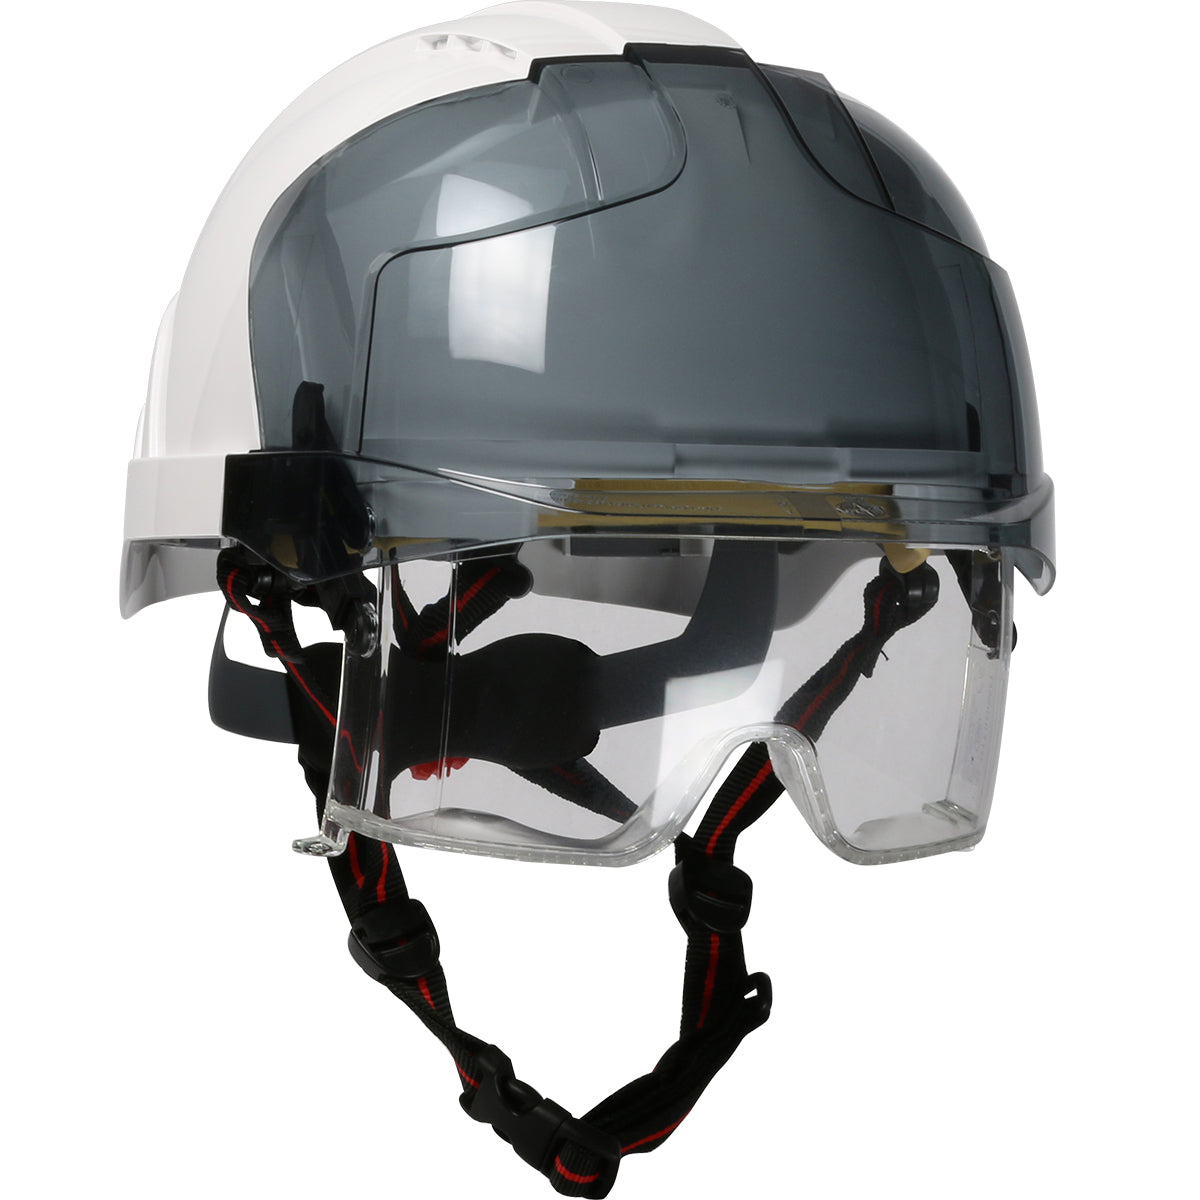 EVO® VISTA™ ASCEND™ Type I, Non-Vented Industrial Safety Helmet with fully adjustable four point chinstrap, Lightweight ABS Shell, Integrated ANSI Z87.1 Eye Protection, 6-Point Polyester Suspension and Wheel Ratchet Adjustment